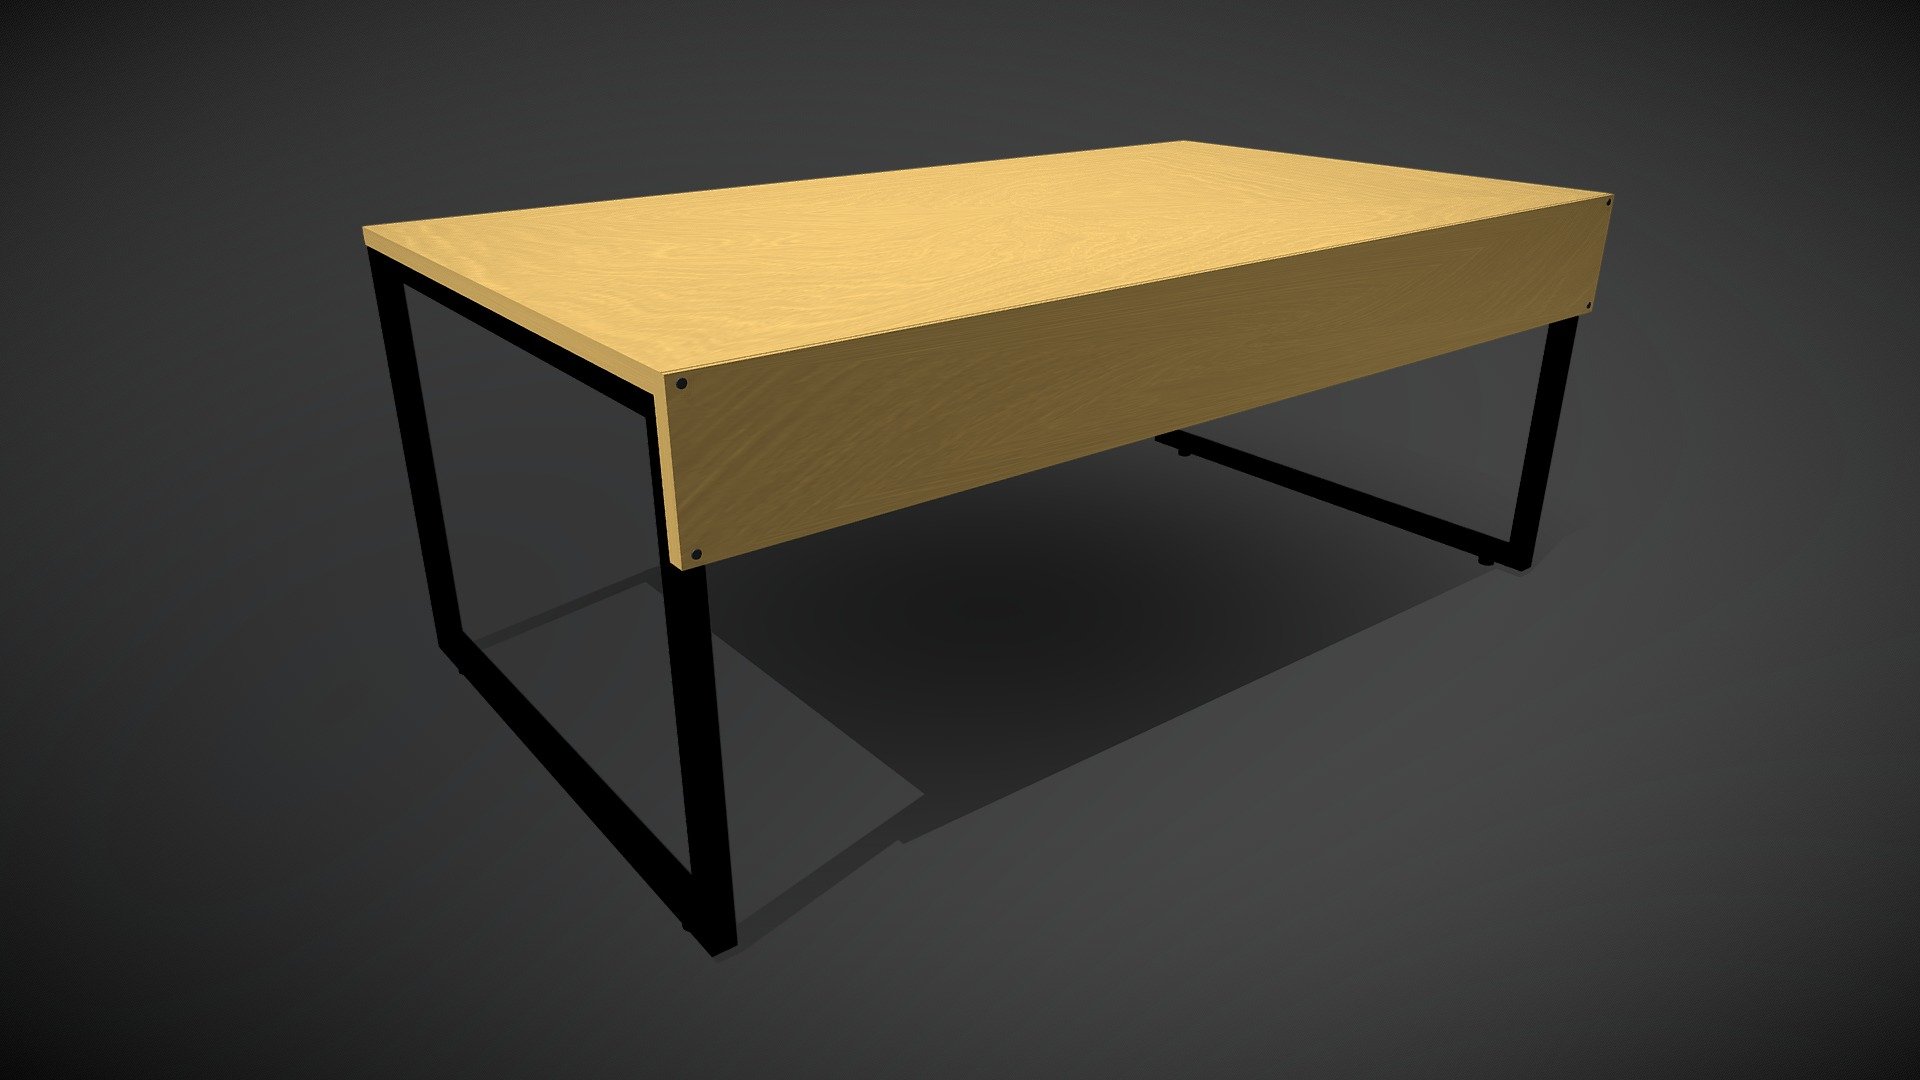 Straight table or desk to use on your jobs with computers and everything 3d model